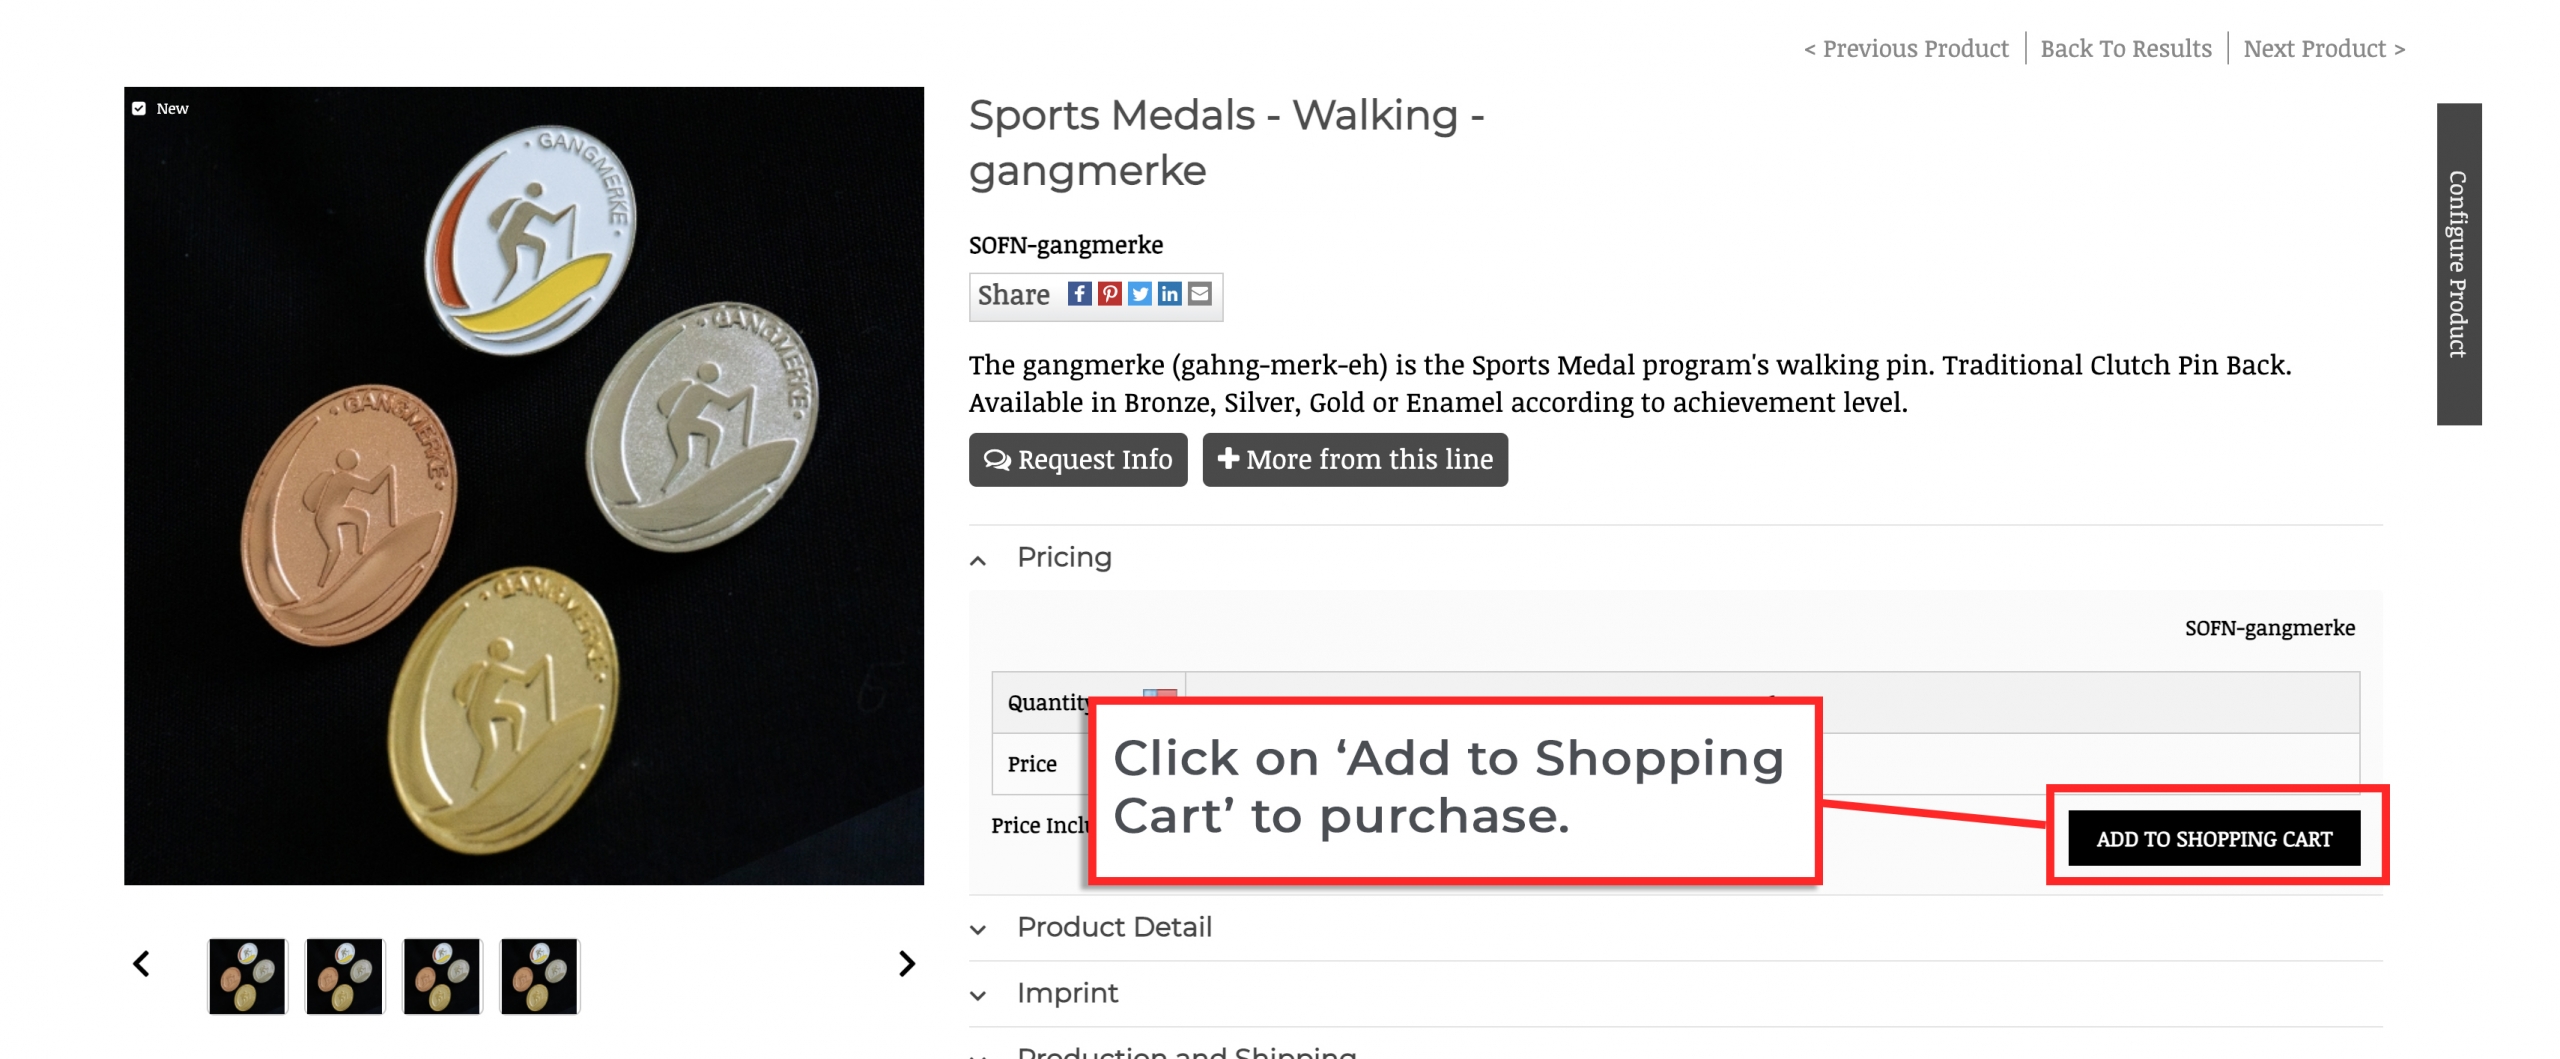 screen shot showing sports medals in the store. Select 